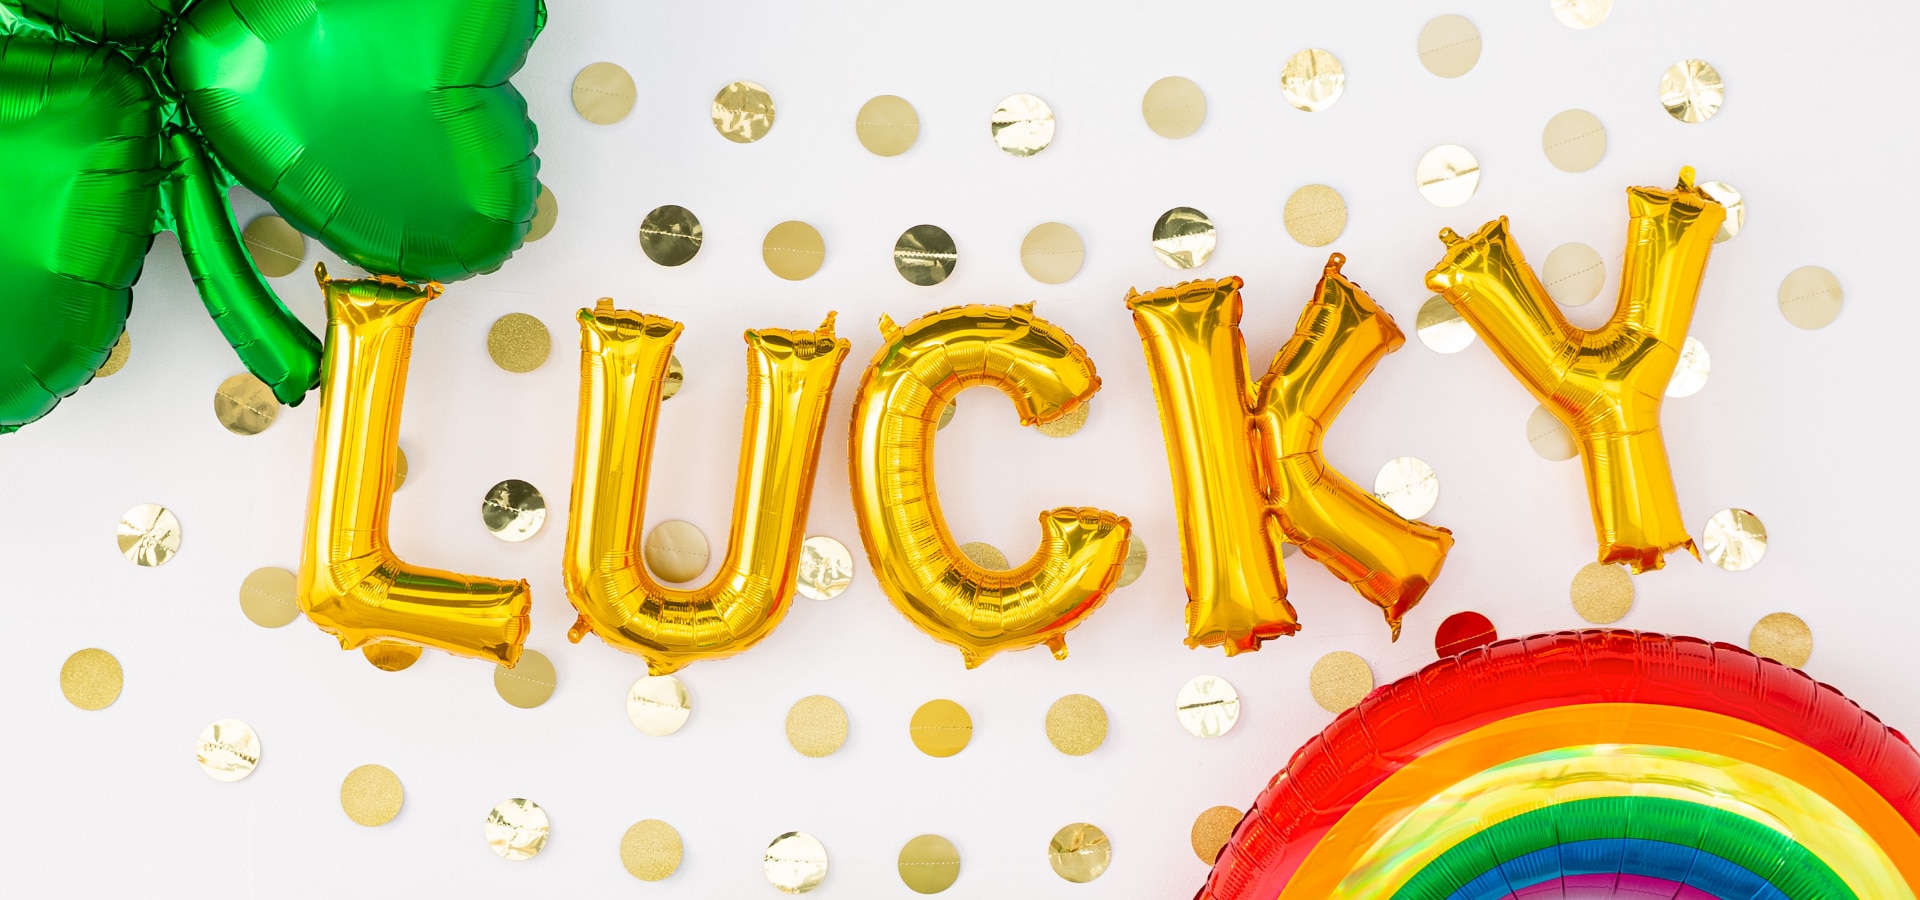 Gold letter balloons that read LUCKY, a green shamrock-shaped foil balloon and a rainbow balloon.